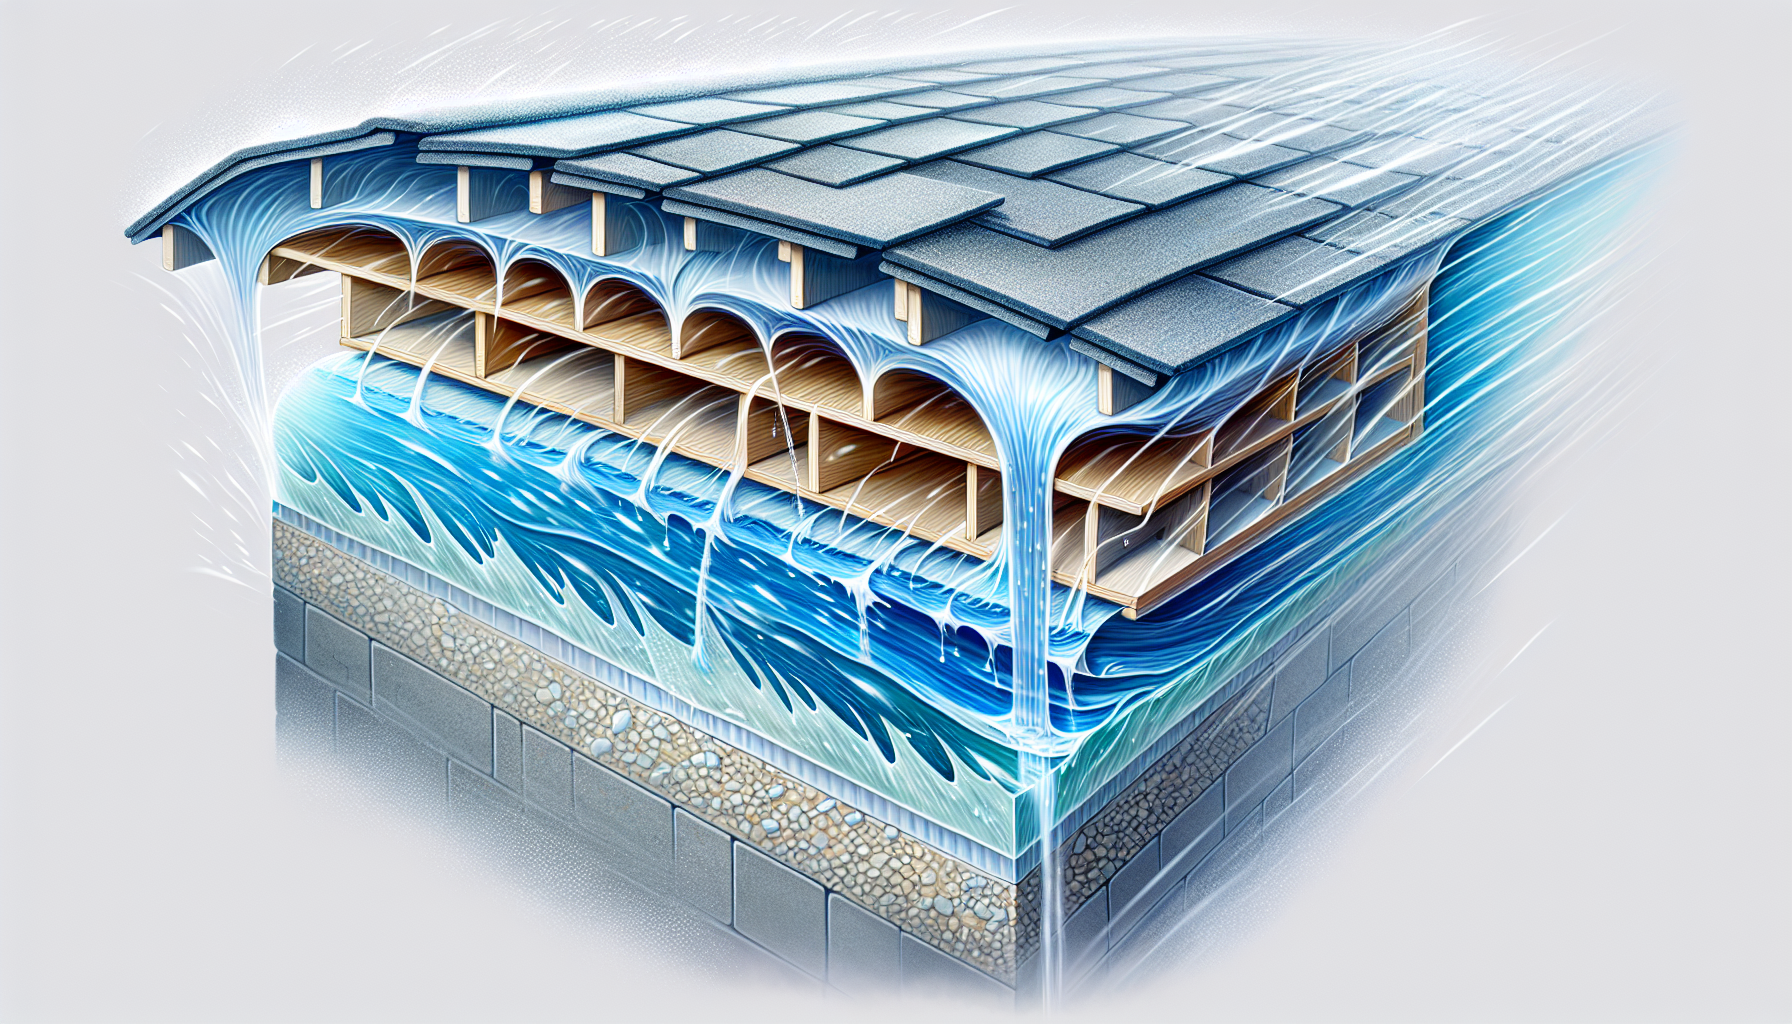 Illustration of roof protection from wind-driven rain